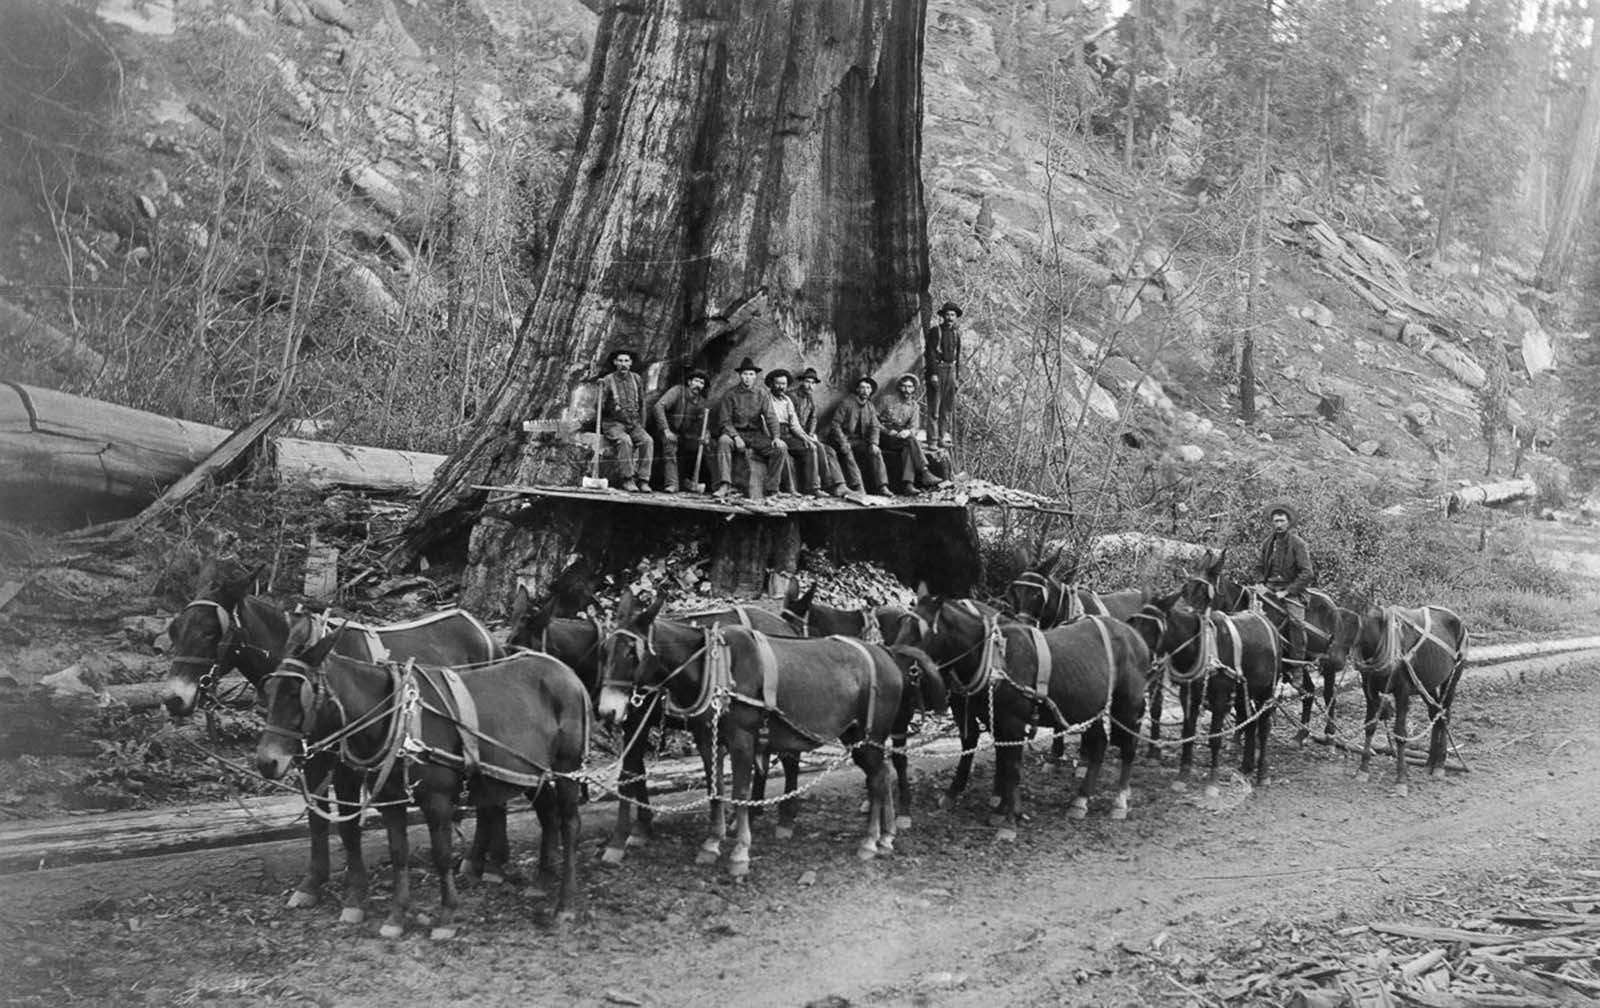 Loggers and a 10-mule team prepare to fell a giant Sequoia tree in California, 1917.